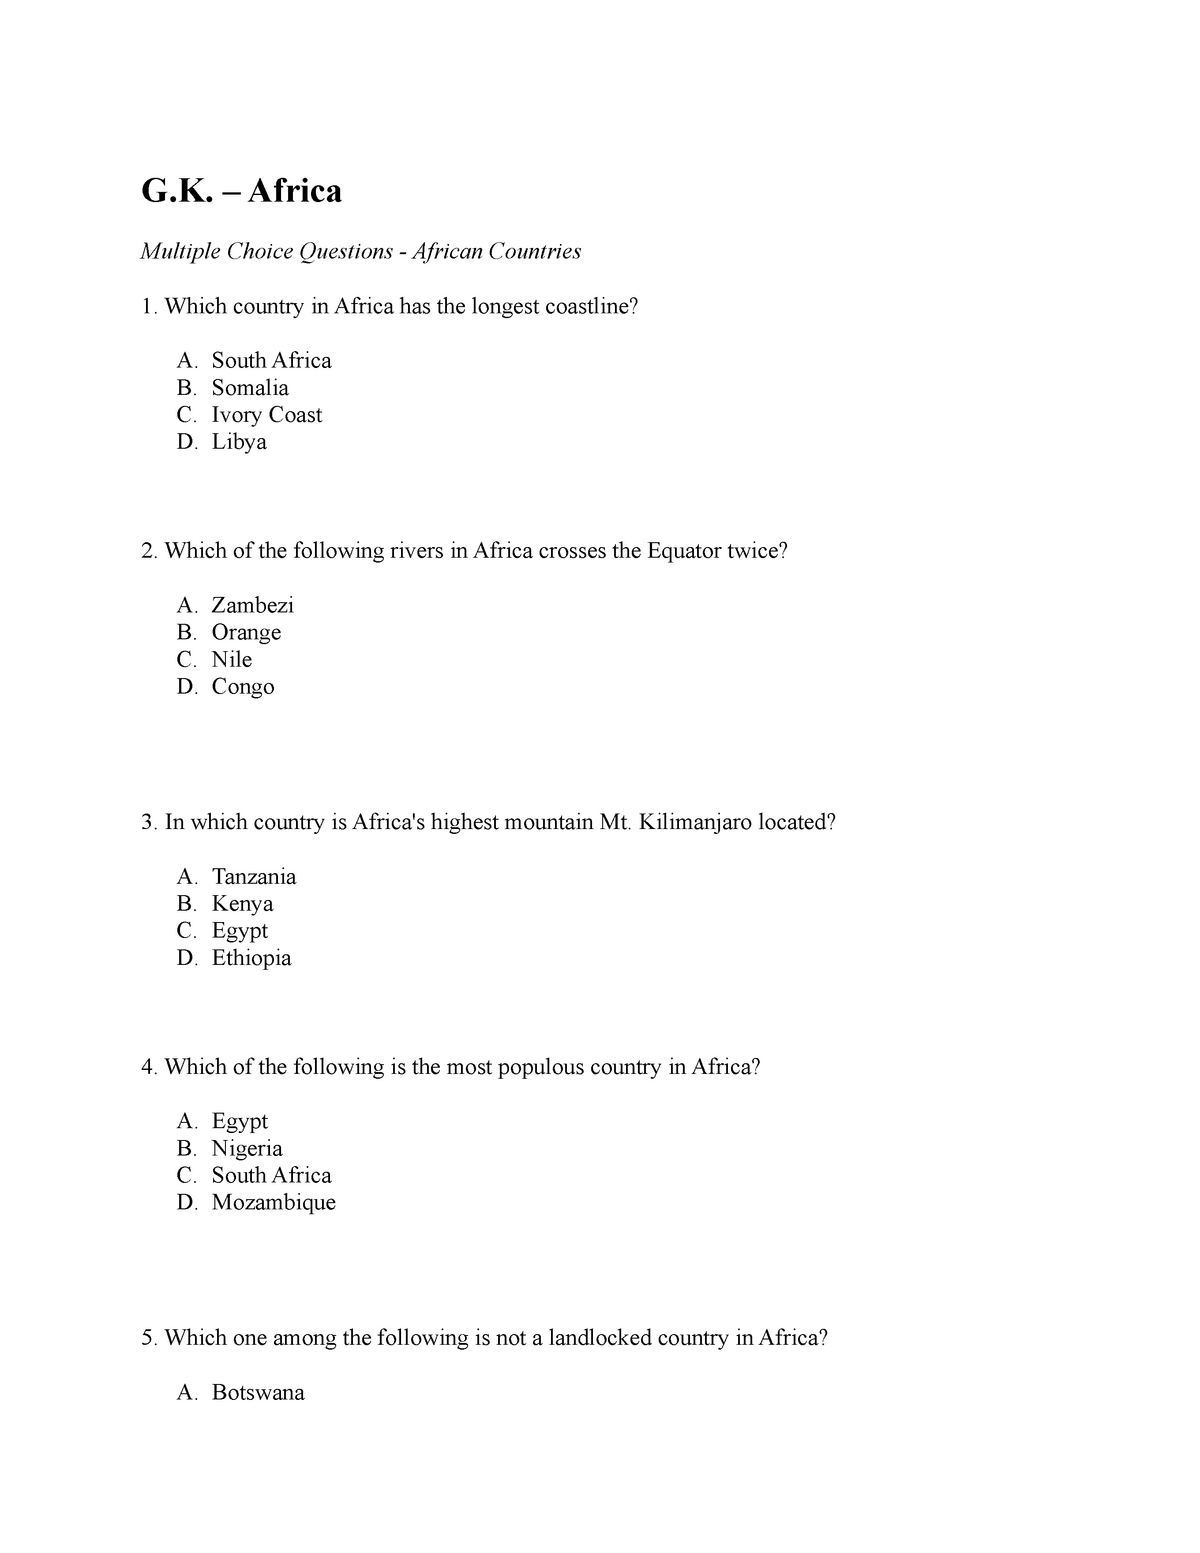 g-notes-g-africa-multiple-choice-questions-african-countries